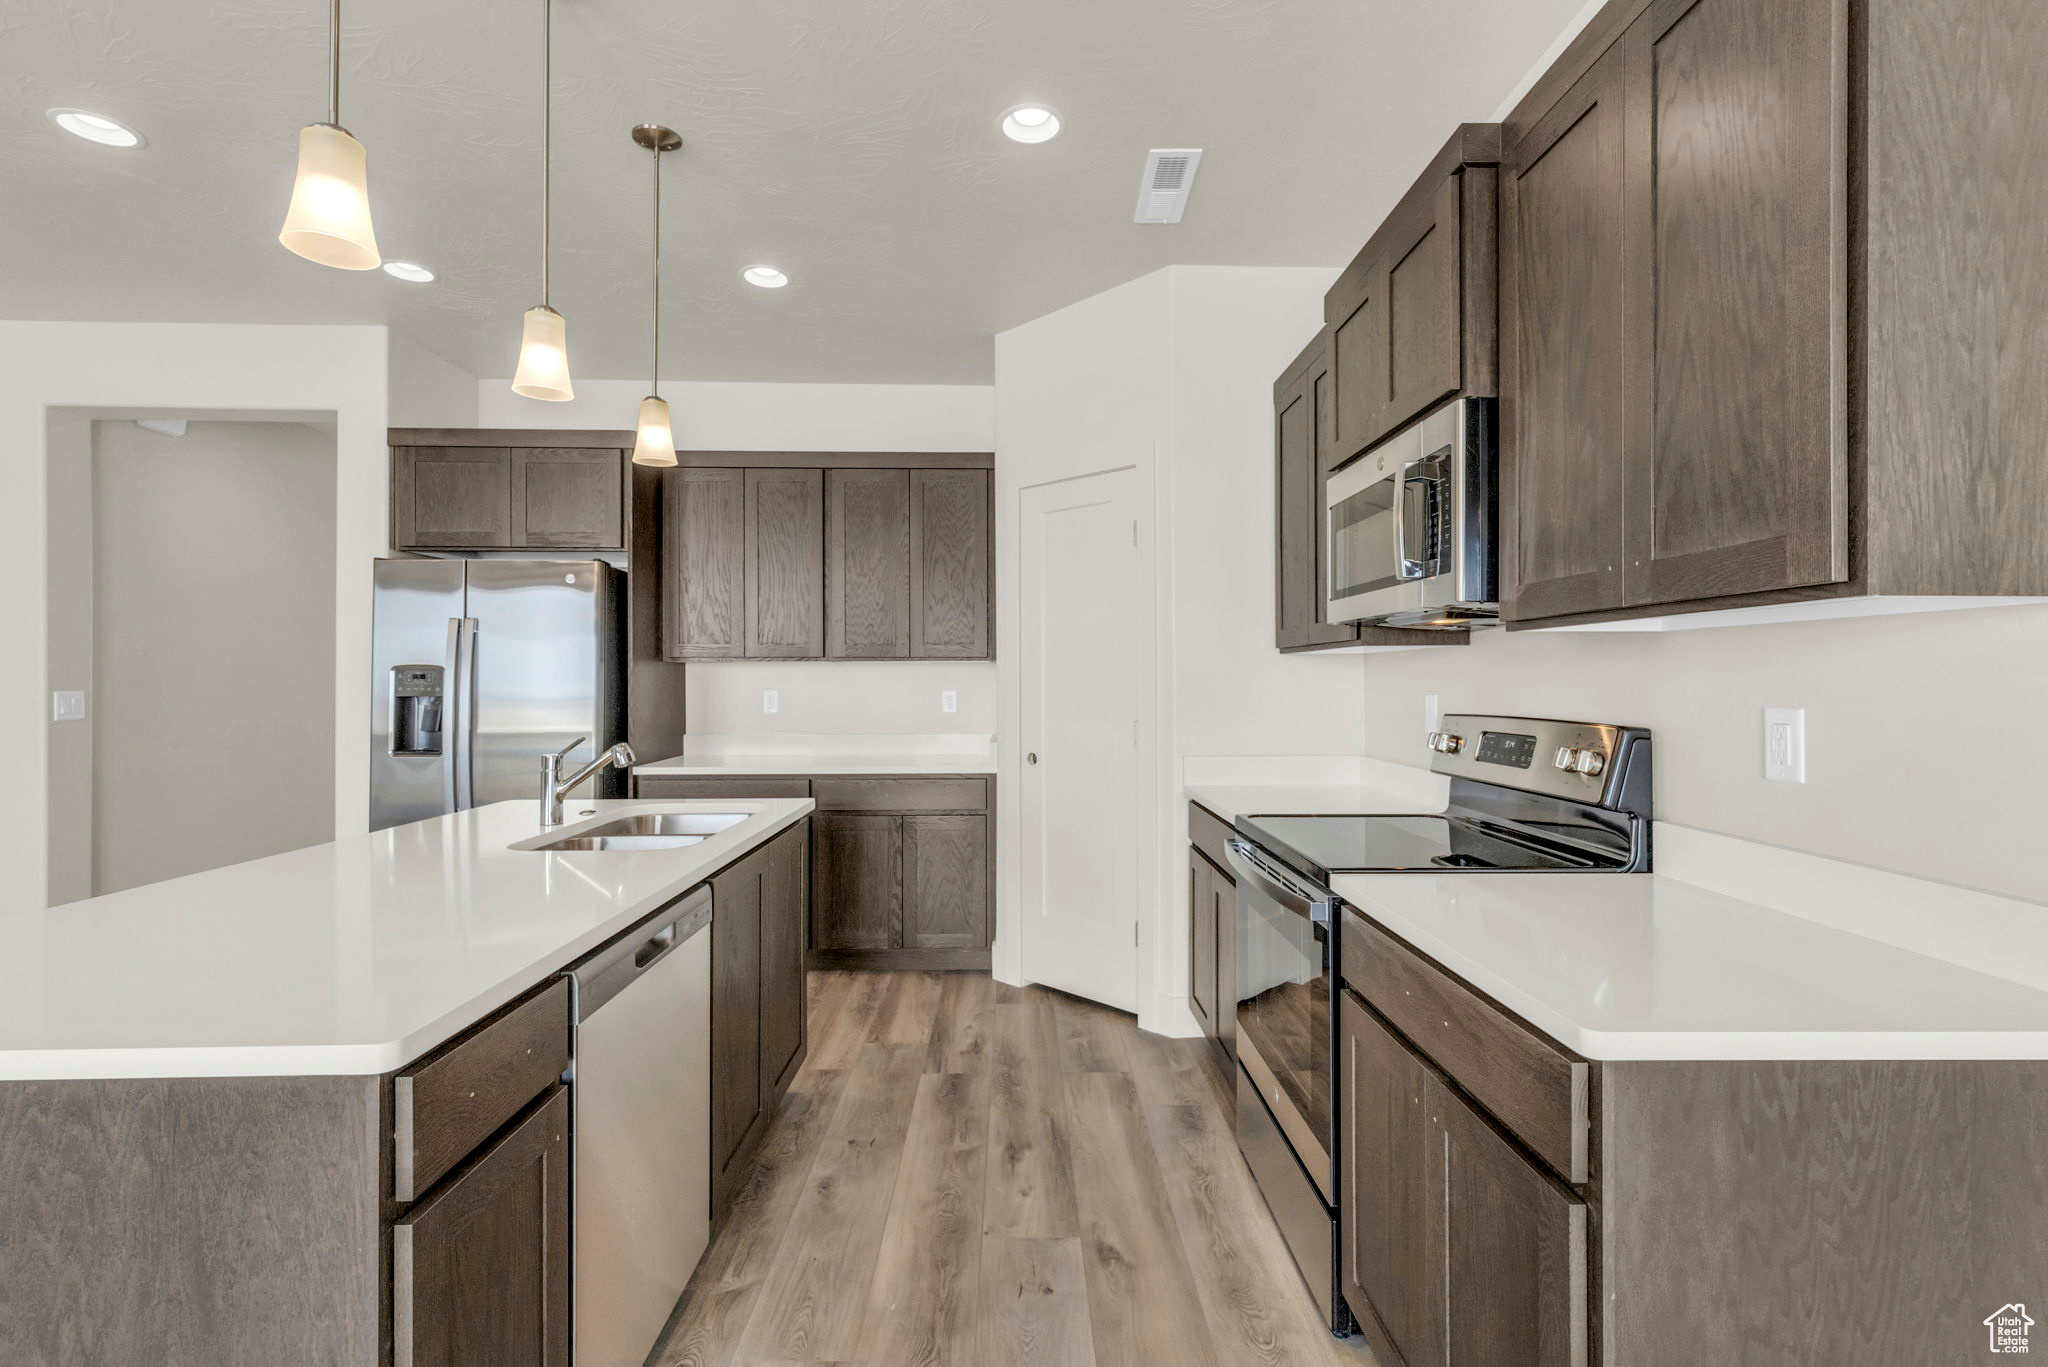 Kitchen featuring light wood-type flooring, pendant lighting, dark brown cabinets, appliances with stainless steel finishes, and an island with sink